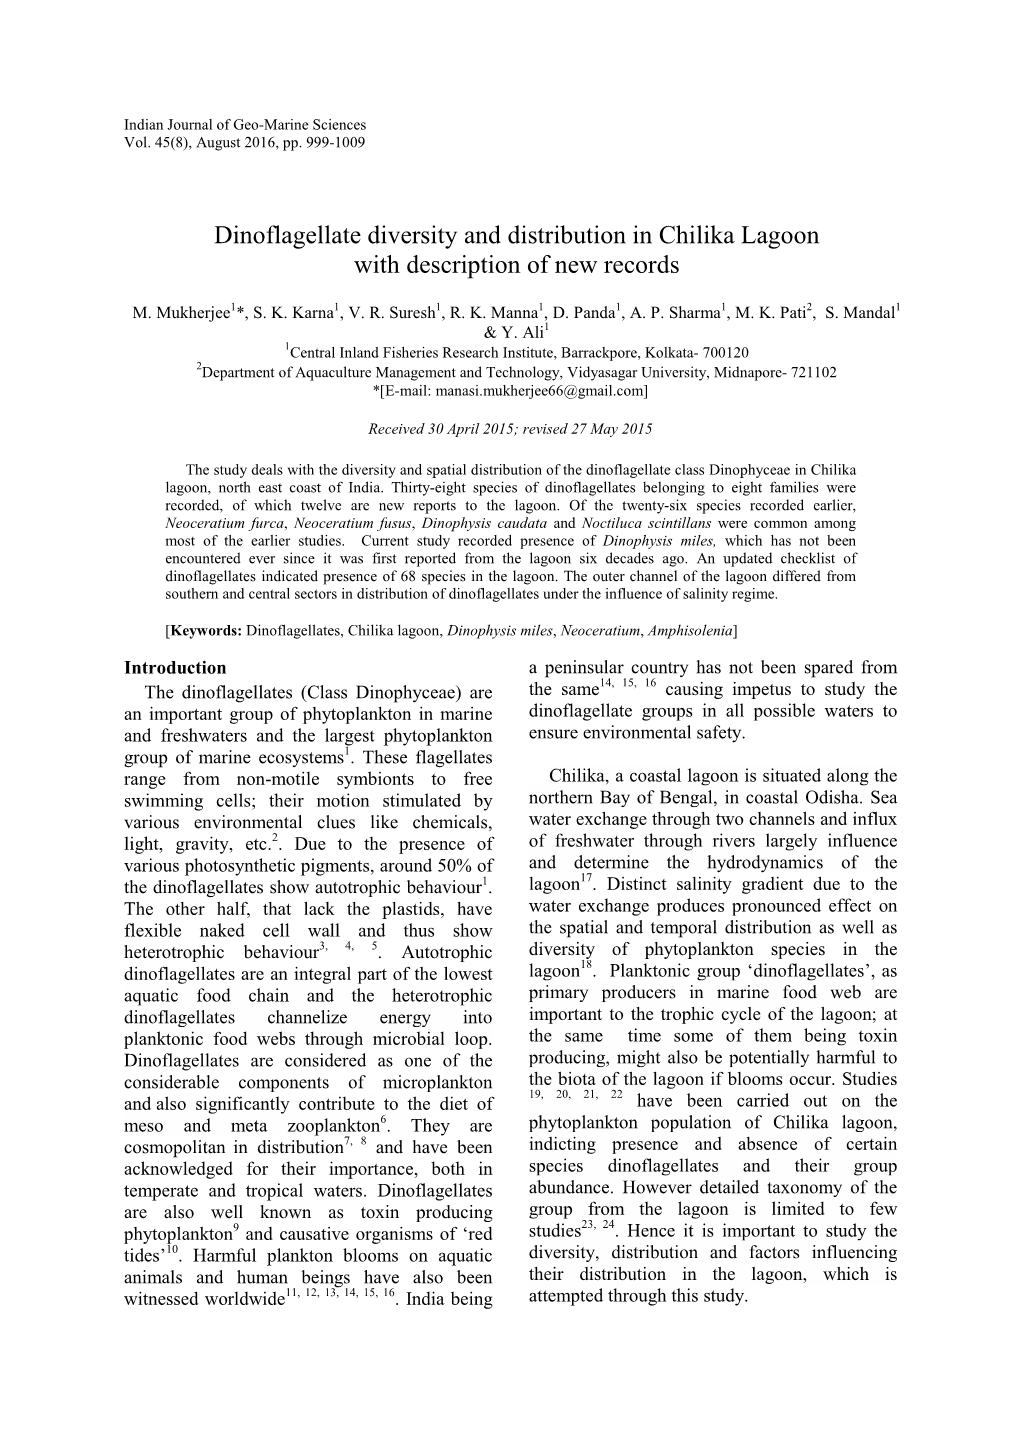 Dinoflagellate Diversity and Distribution in Chilika Lagoon with Description of New Records